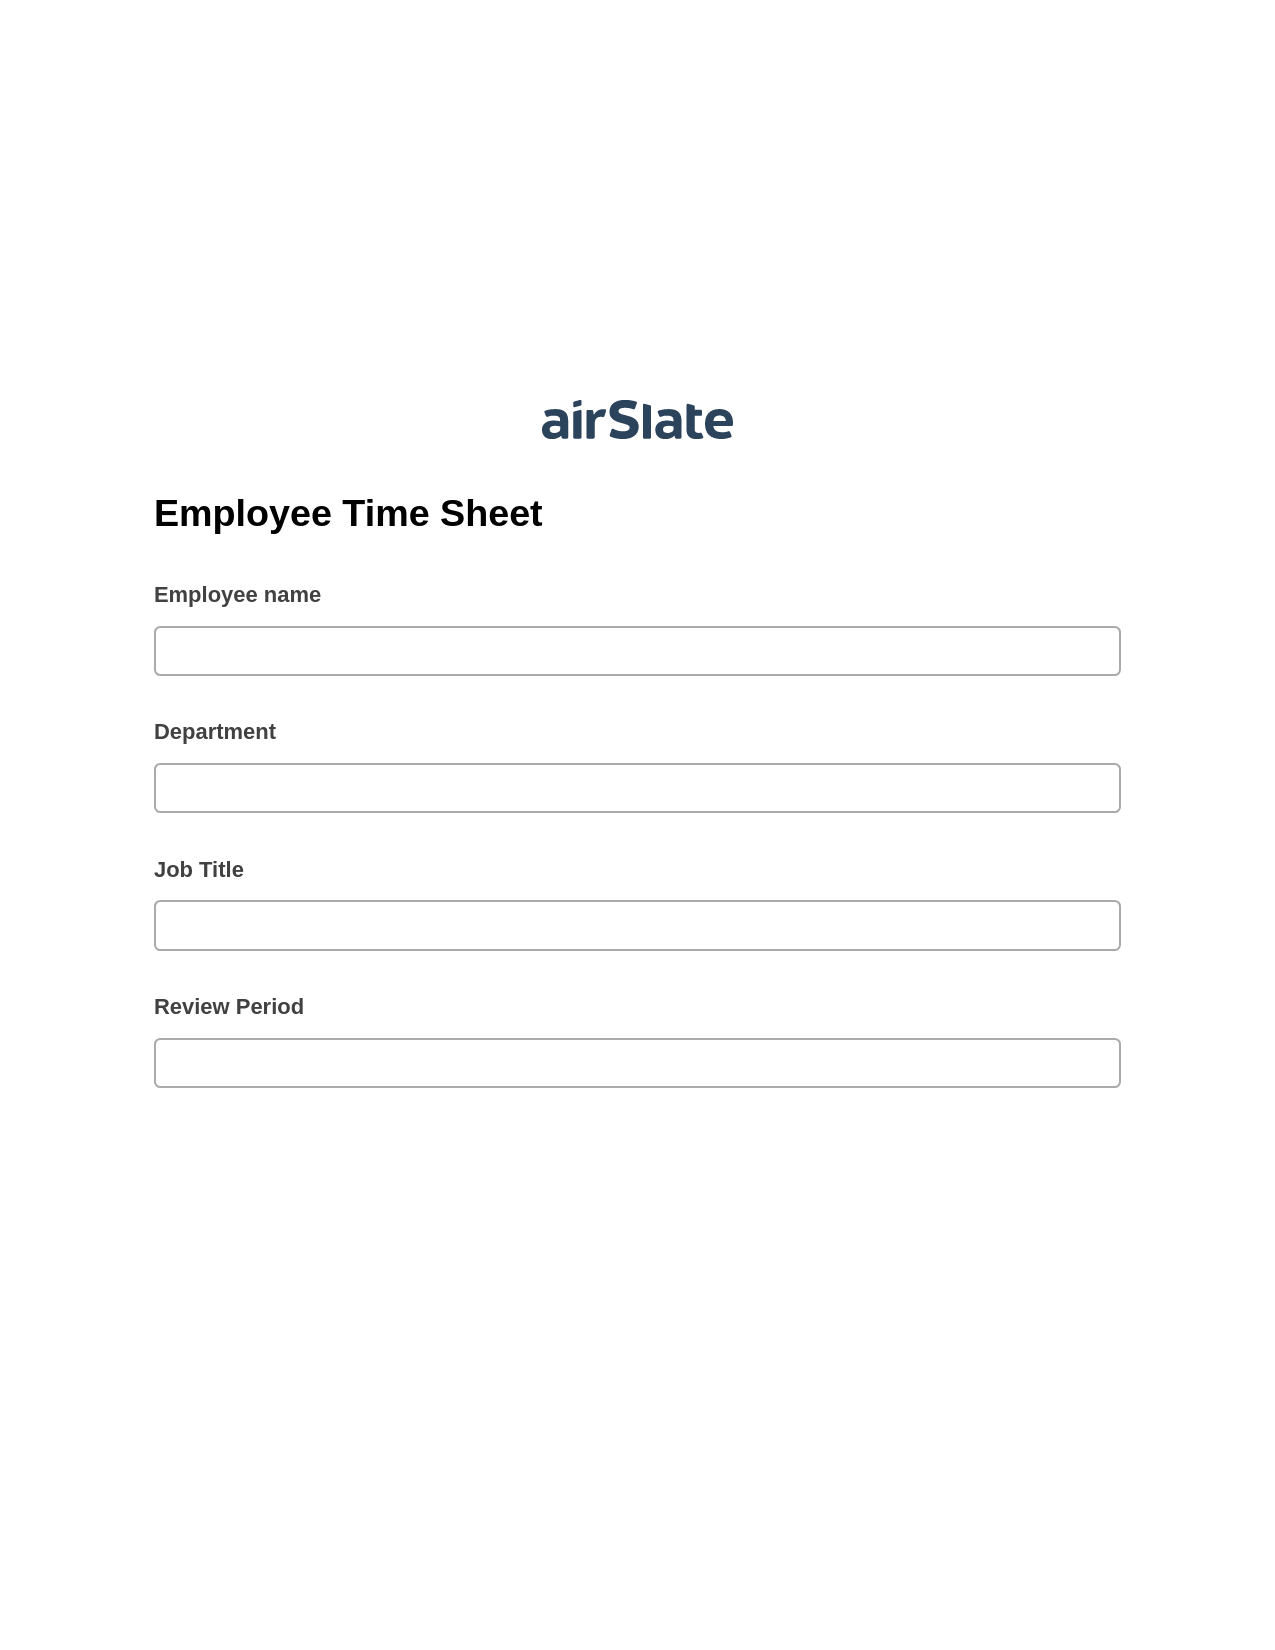 Multirole Employee Time Sheet Pre-fill from Salesforce Records with SOQL Bot, Create slate addon, Export to MySQL Bot